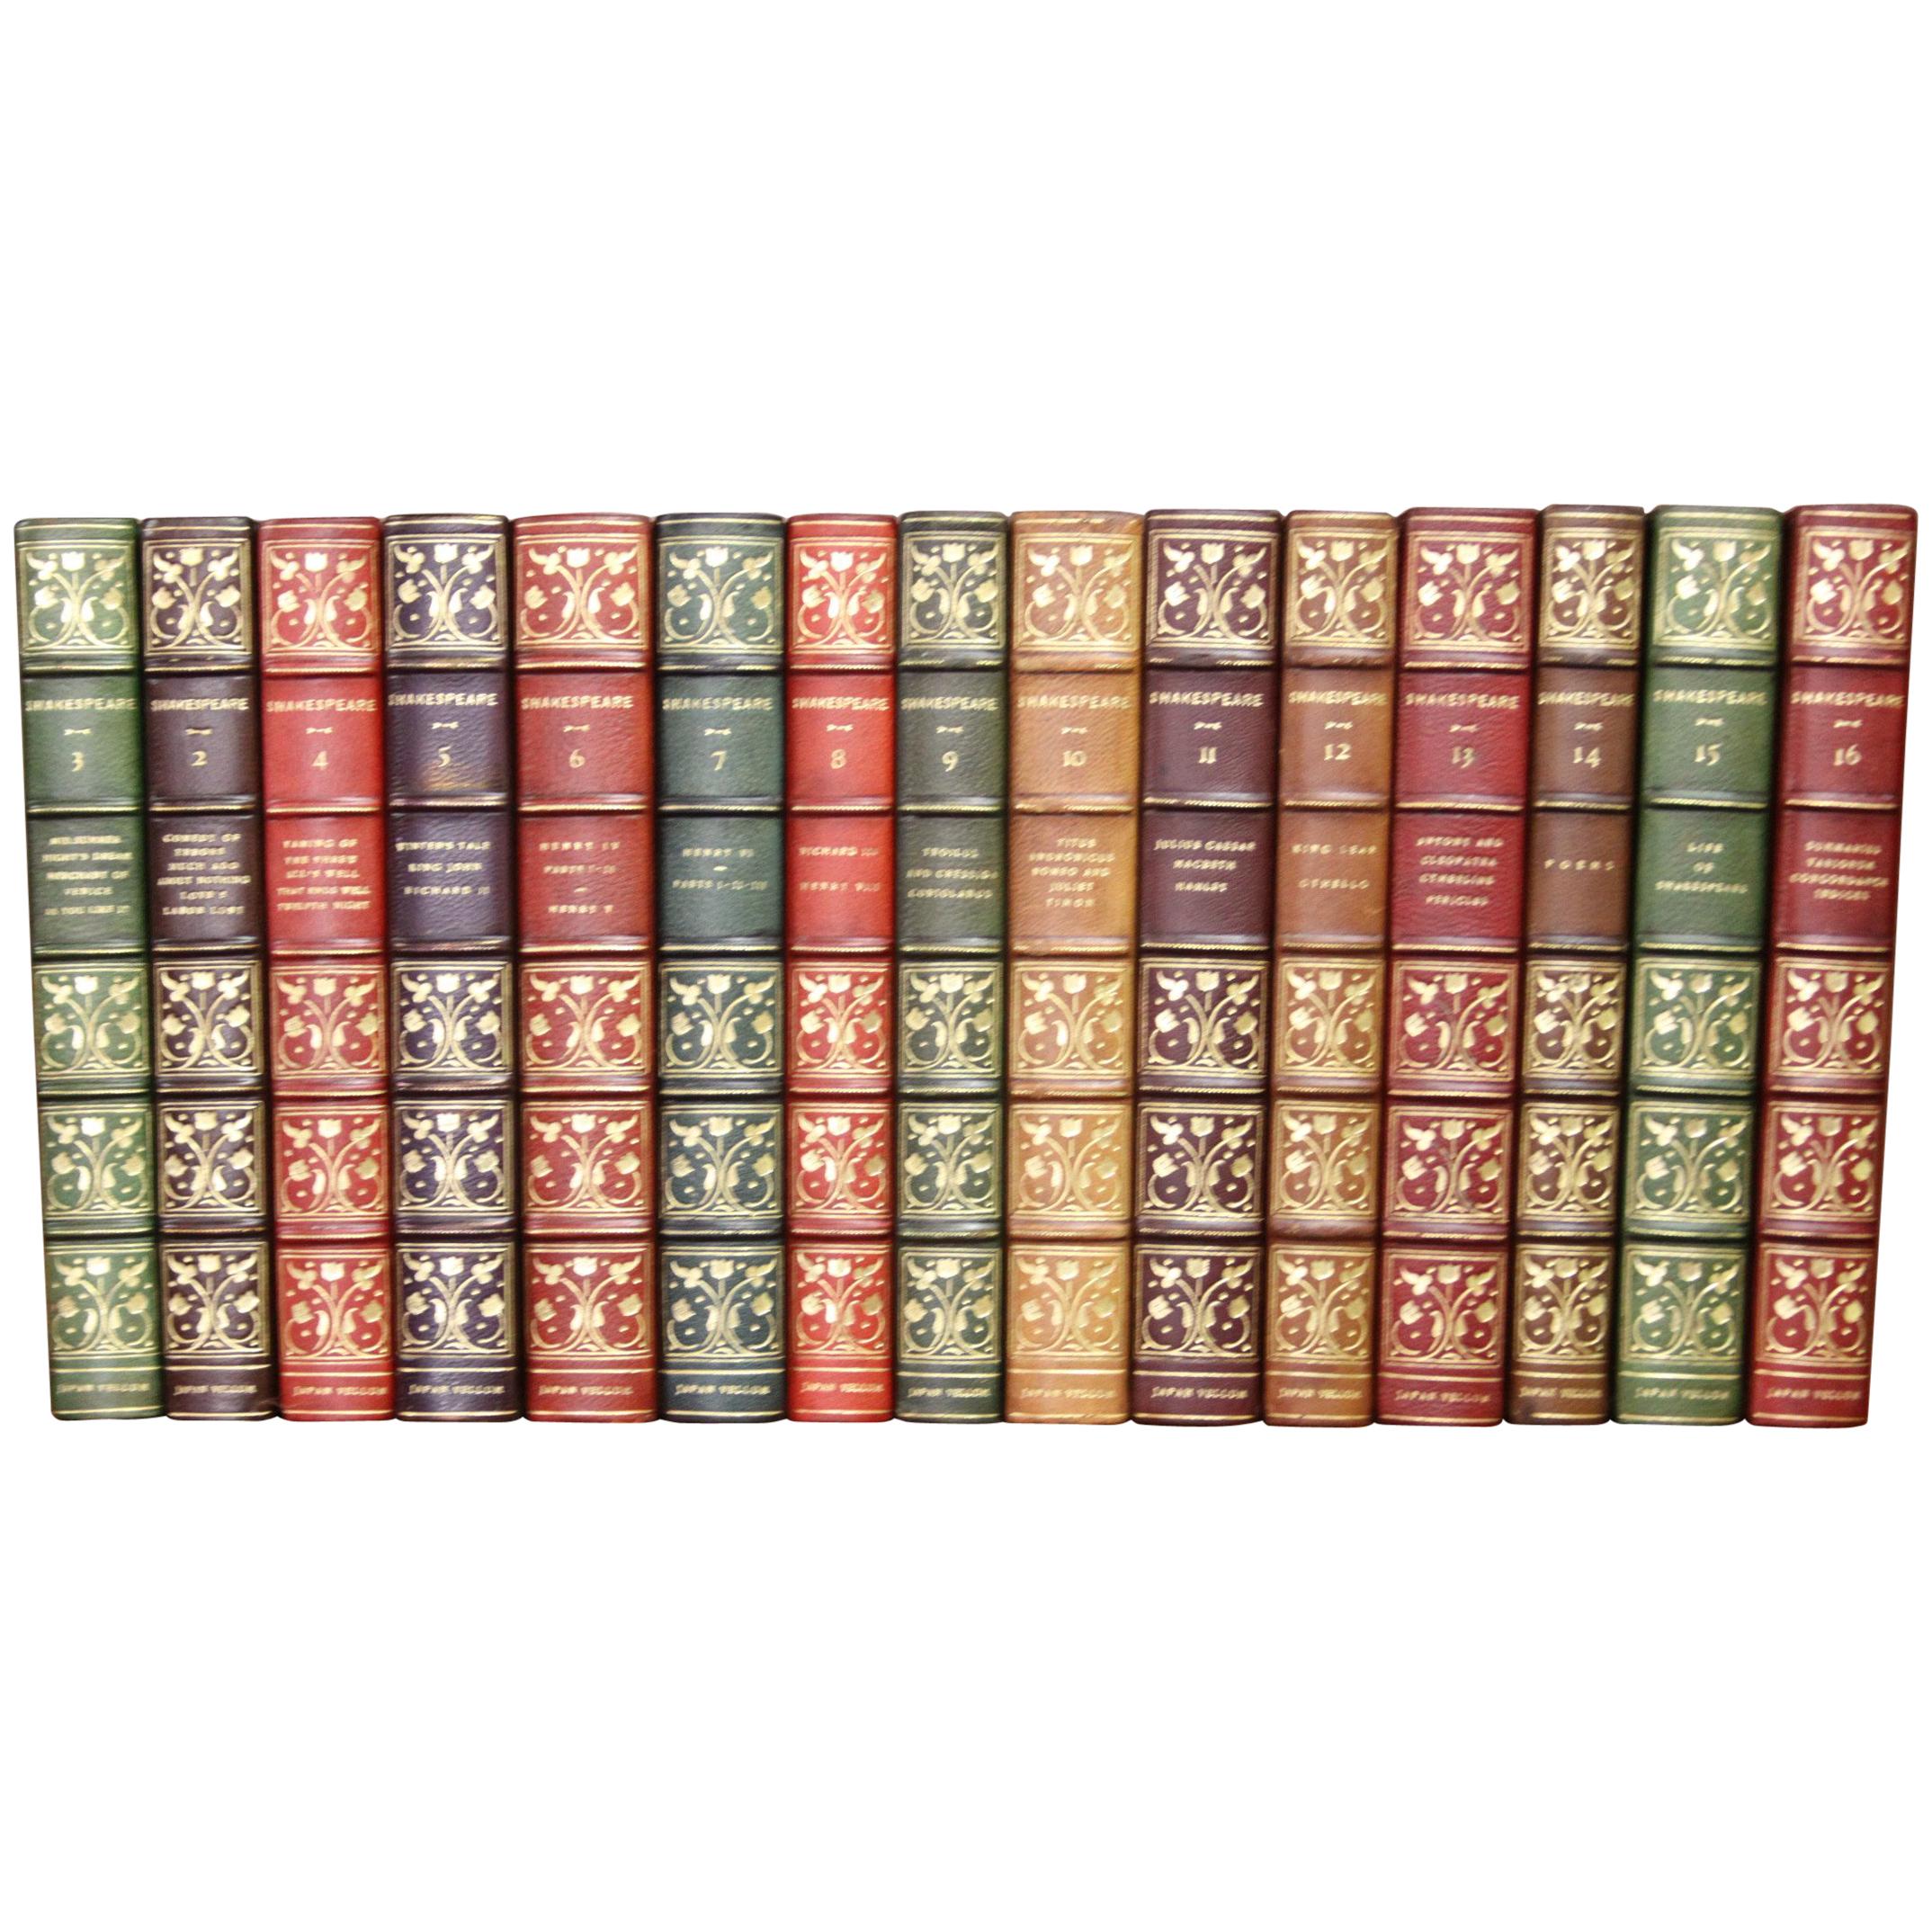 Books, The Works of William Shakespeare, Antique Leather-Bound Collections